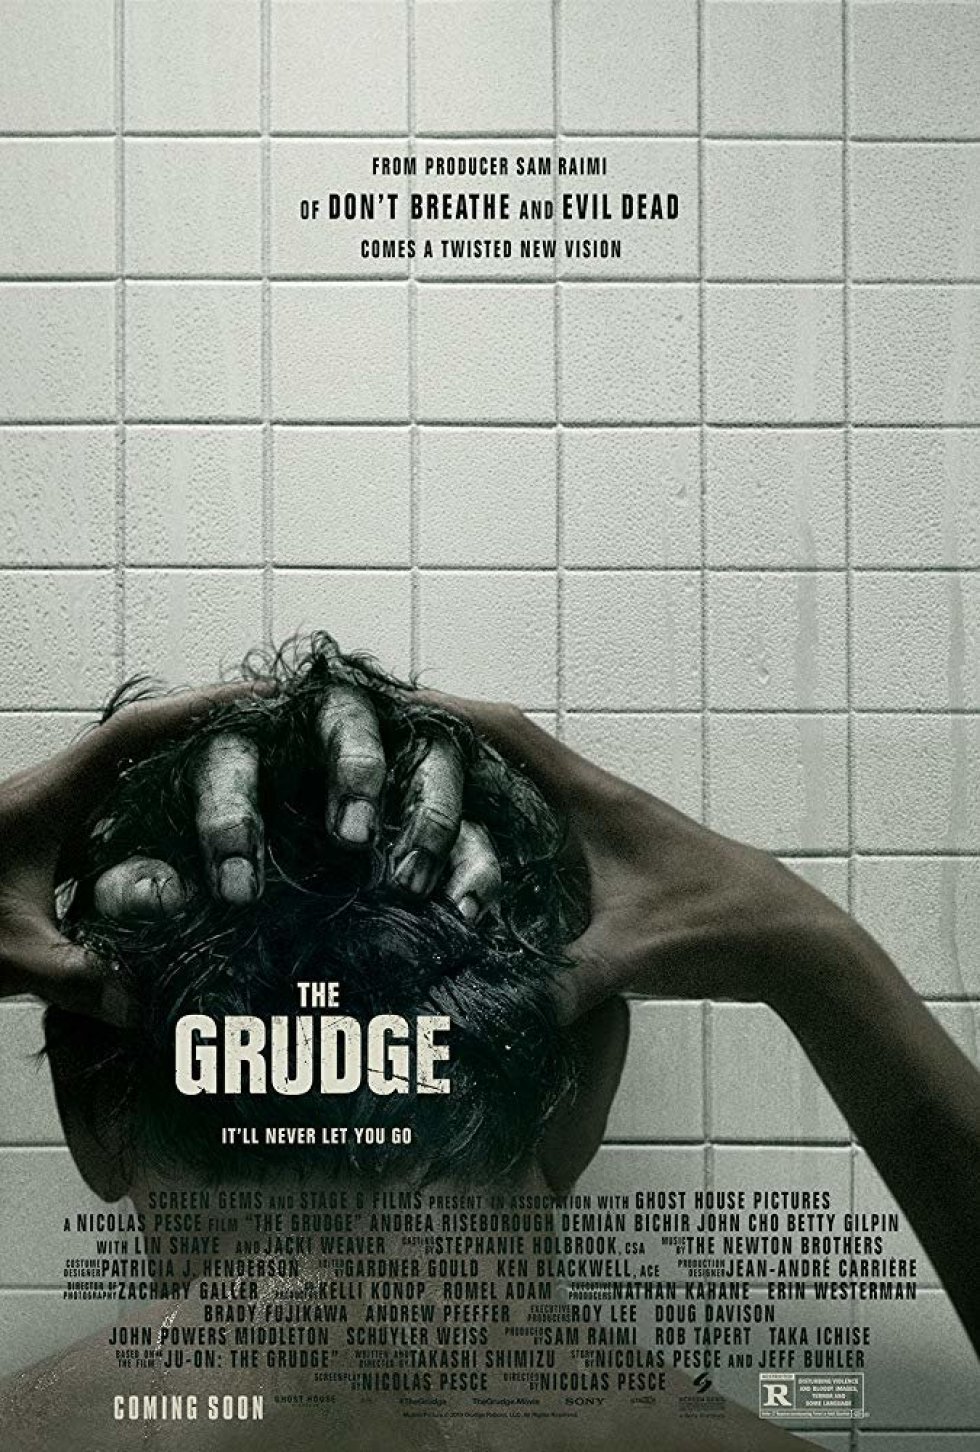 Sony Pictures - The Grudge (Anmeldelse)